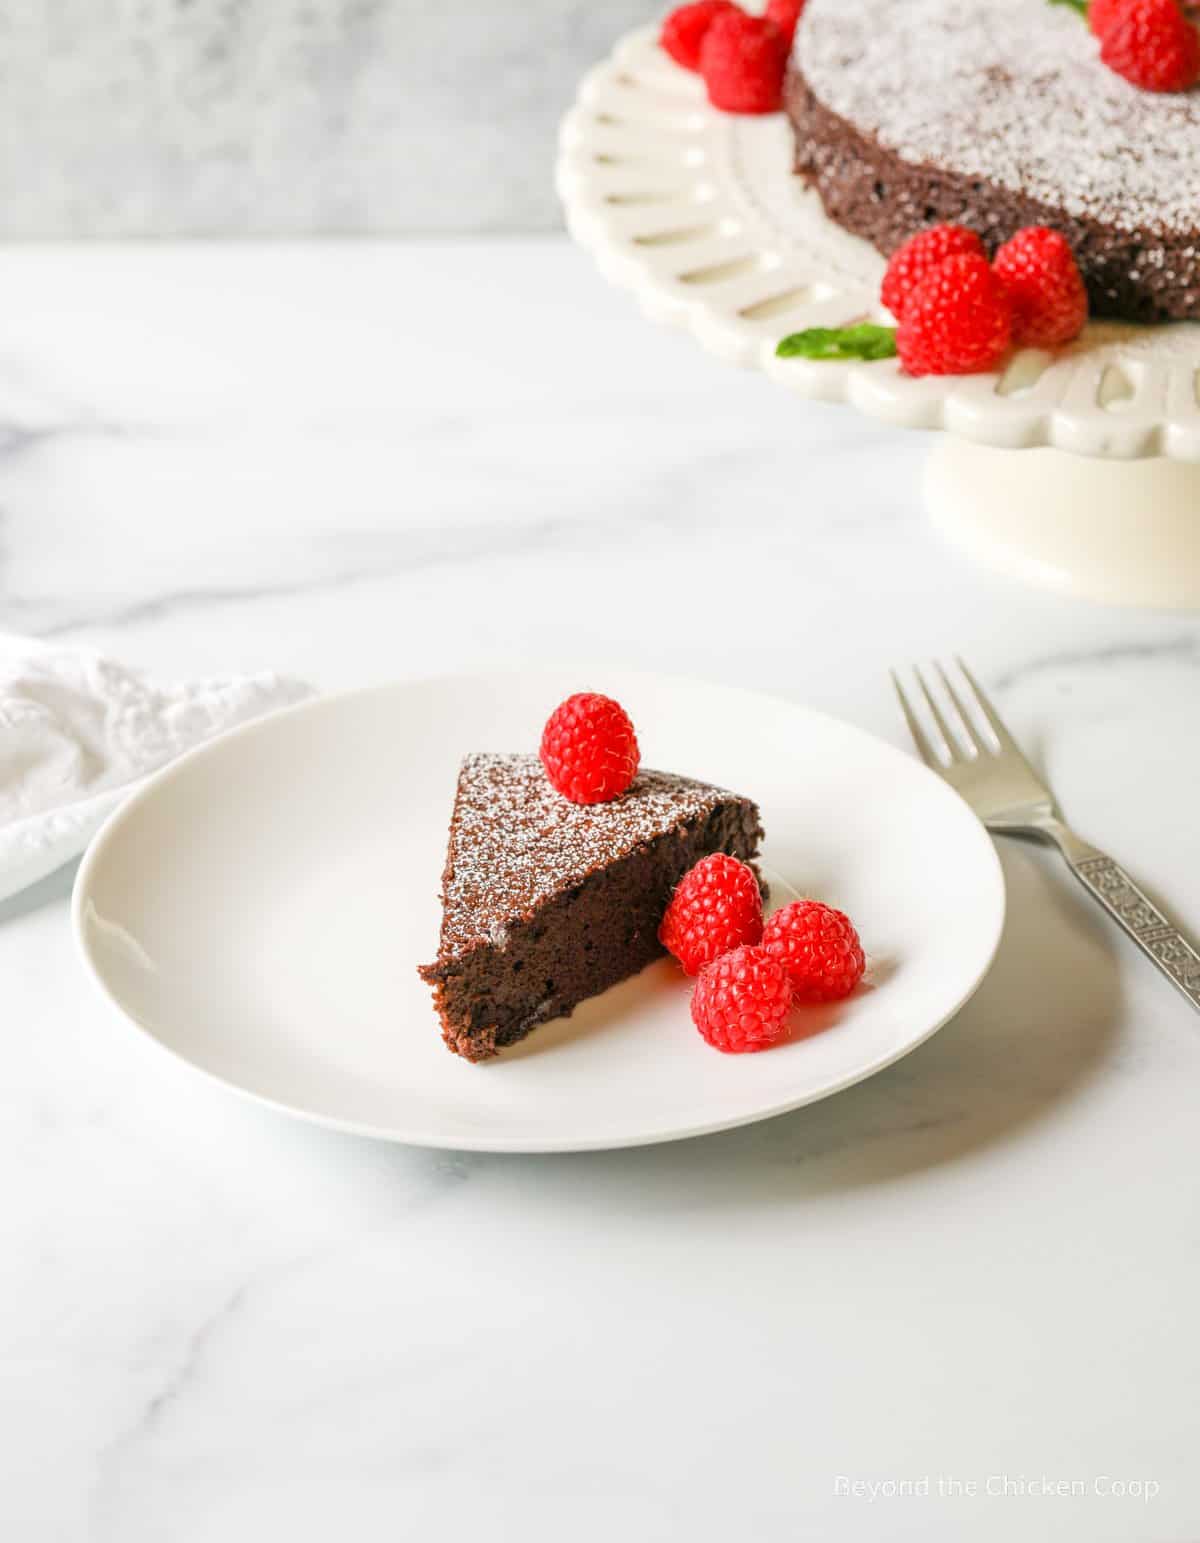 A slice of chocolate cake with raspberries.